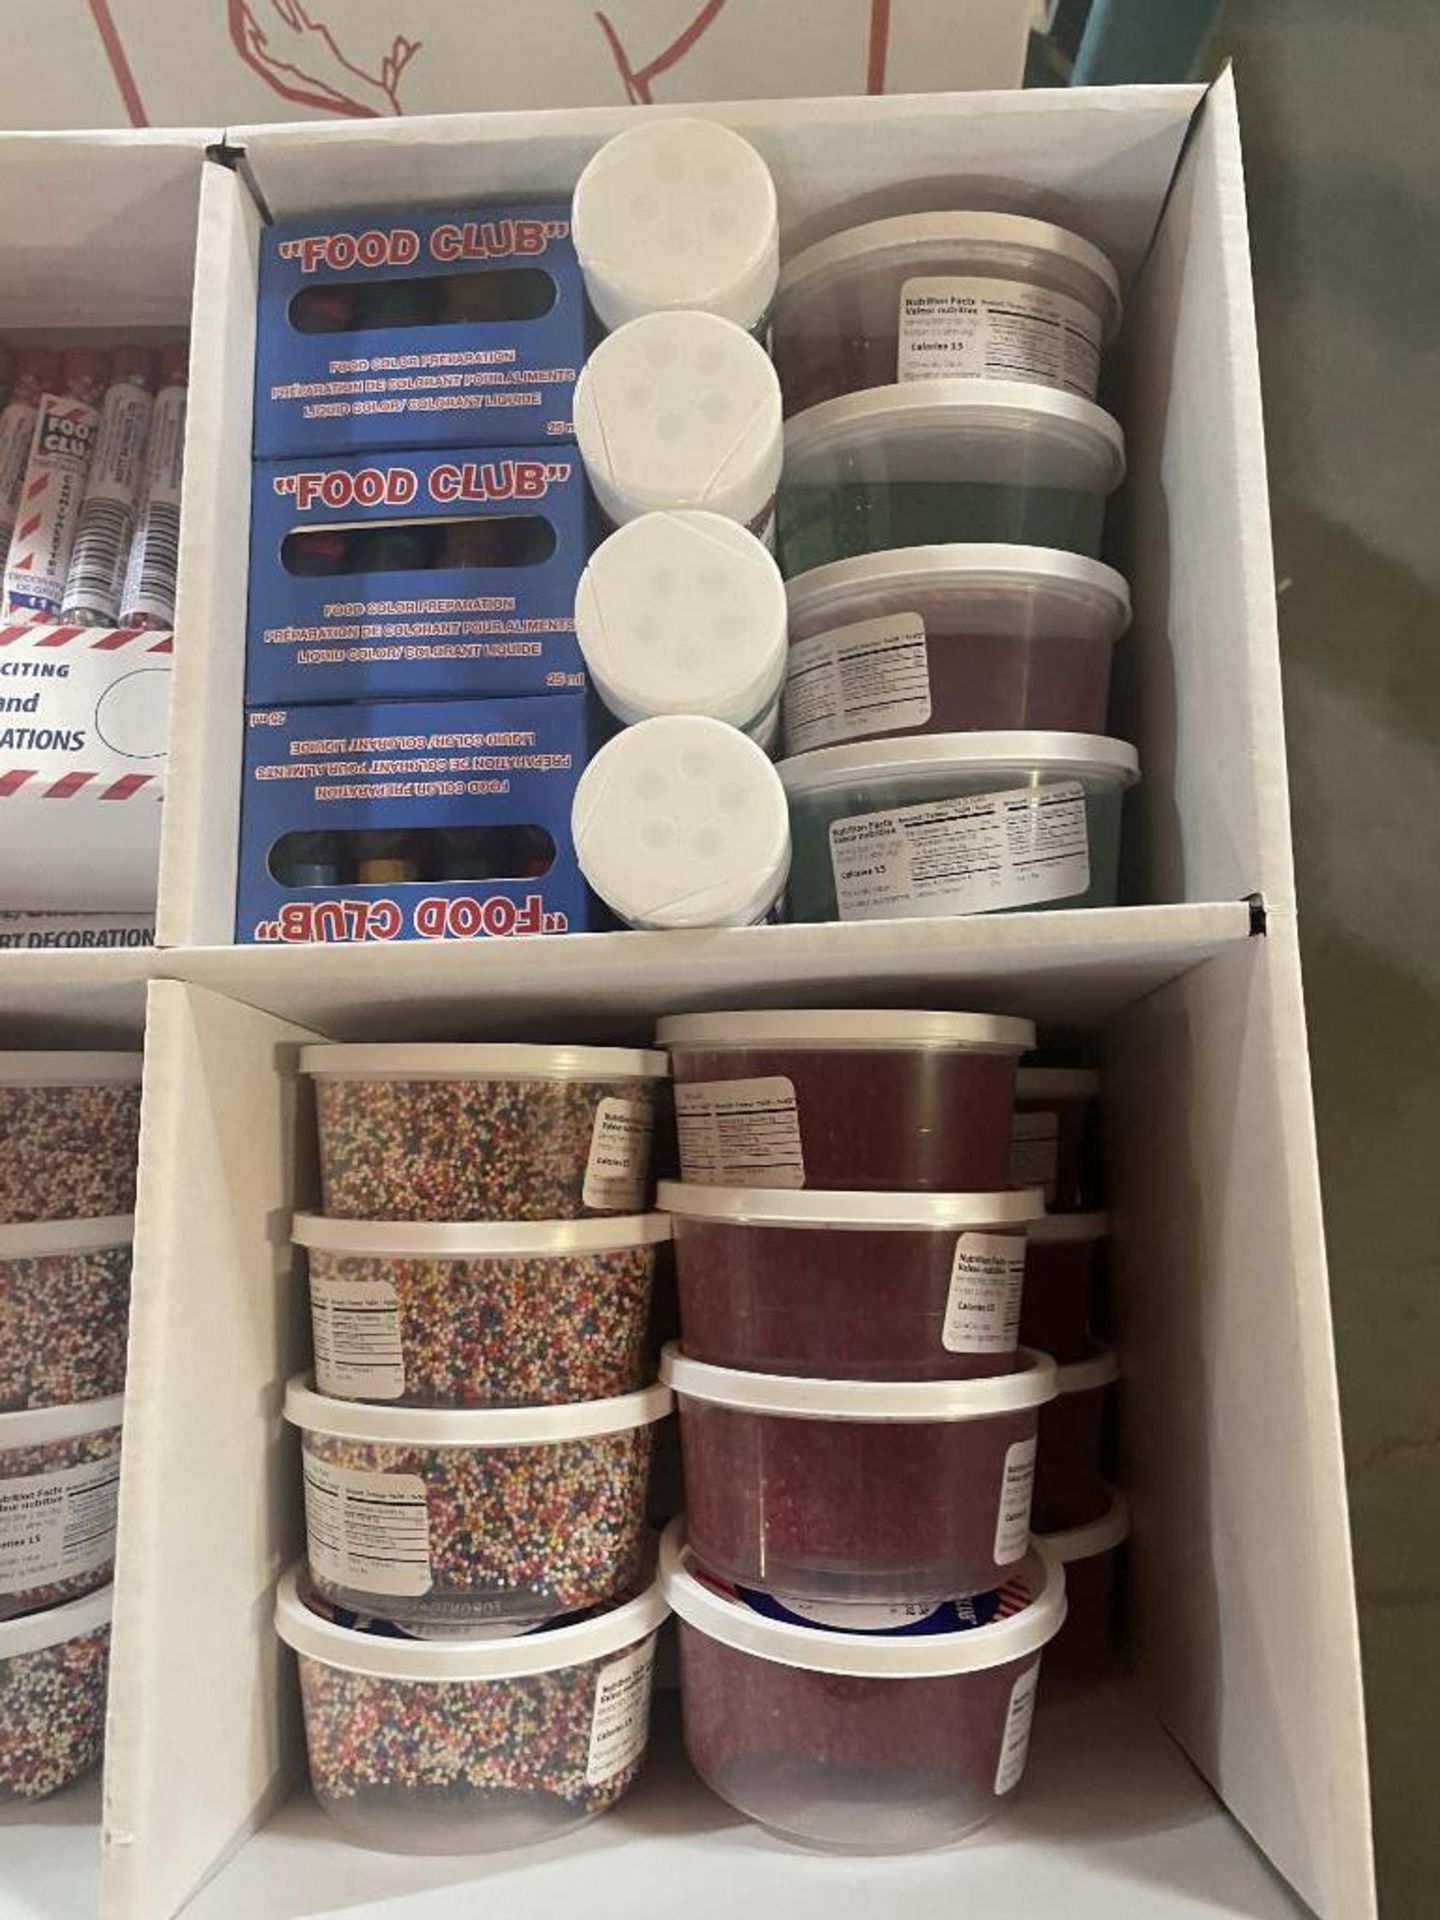 NUTTY CLUB BAKING SUPPLIES FREESTANDING RETAIL DISPLAY - Image 4 of 6